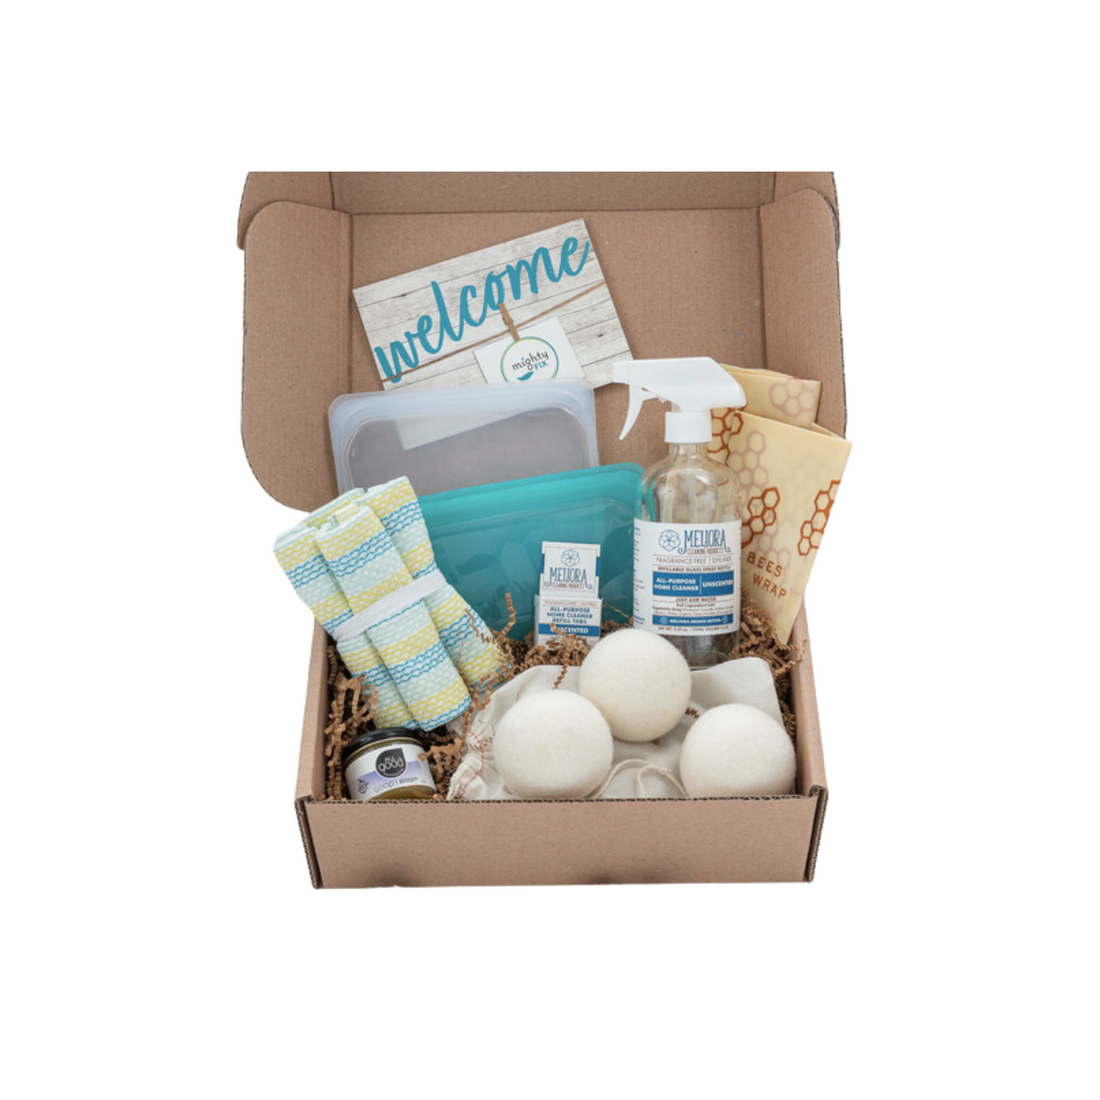 MIGHTYNEST NON-TOXIC PRODUCTS